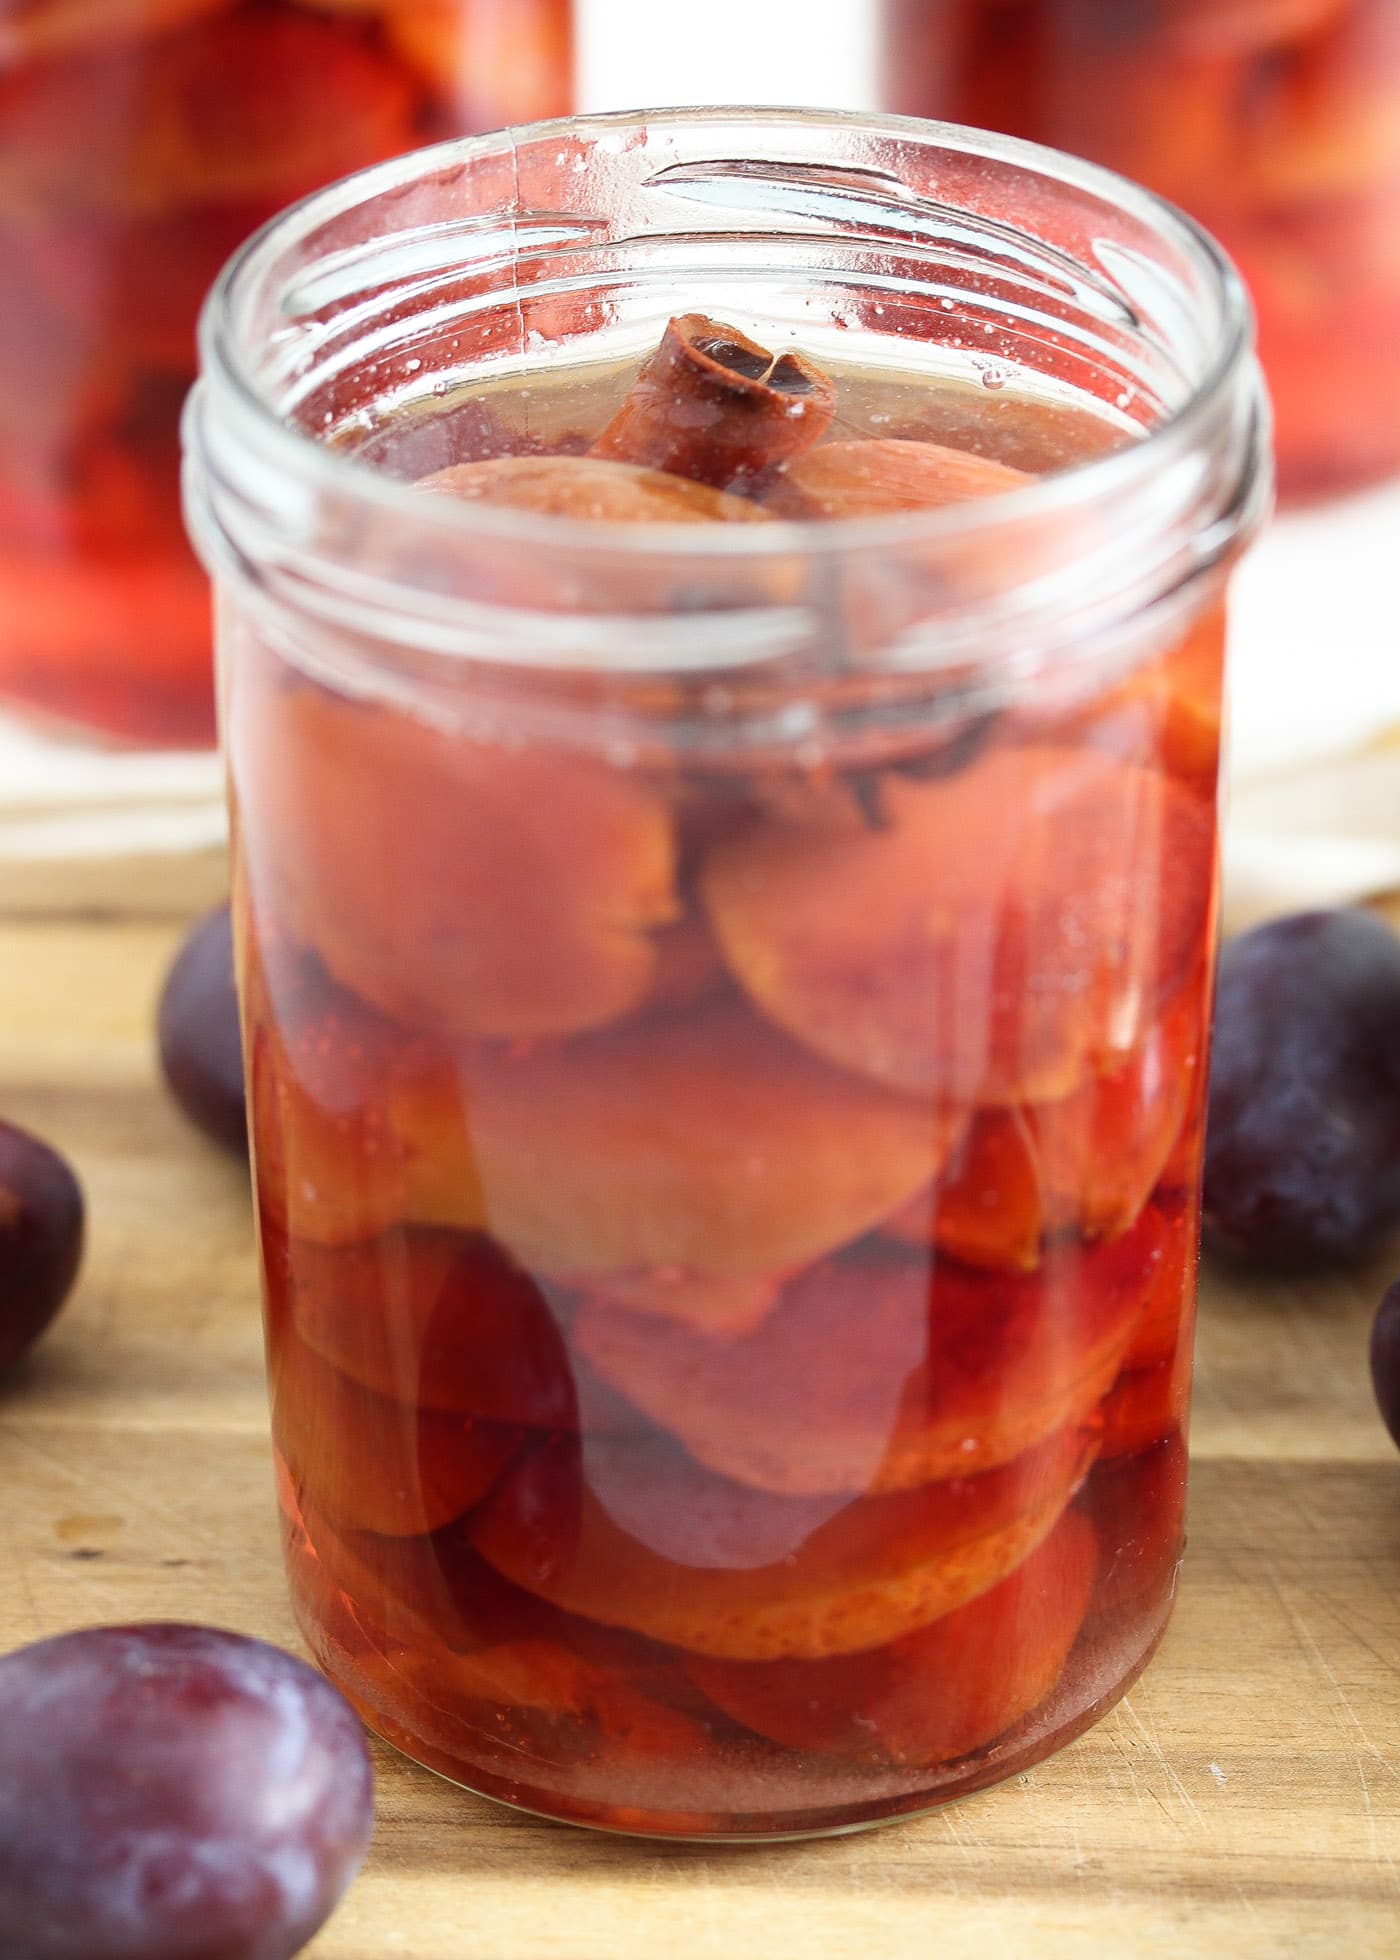 Italian plums canned in jars on a cutting board